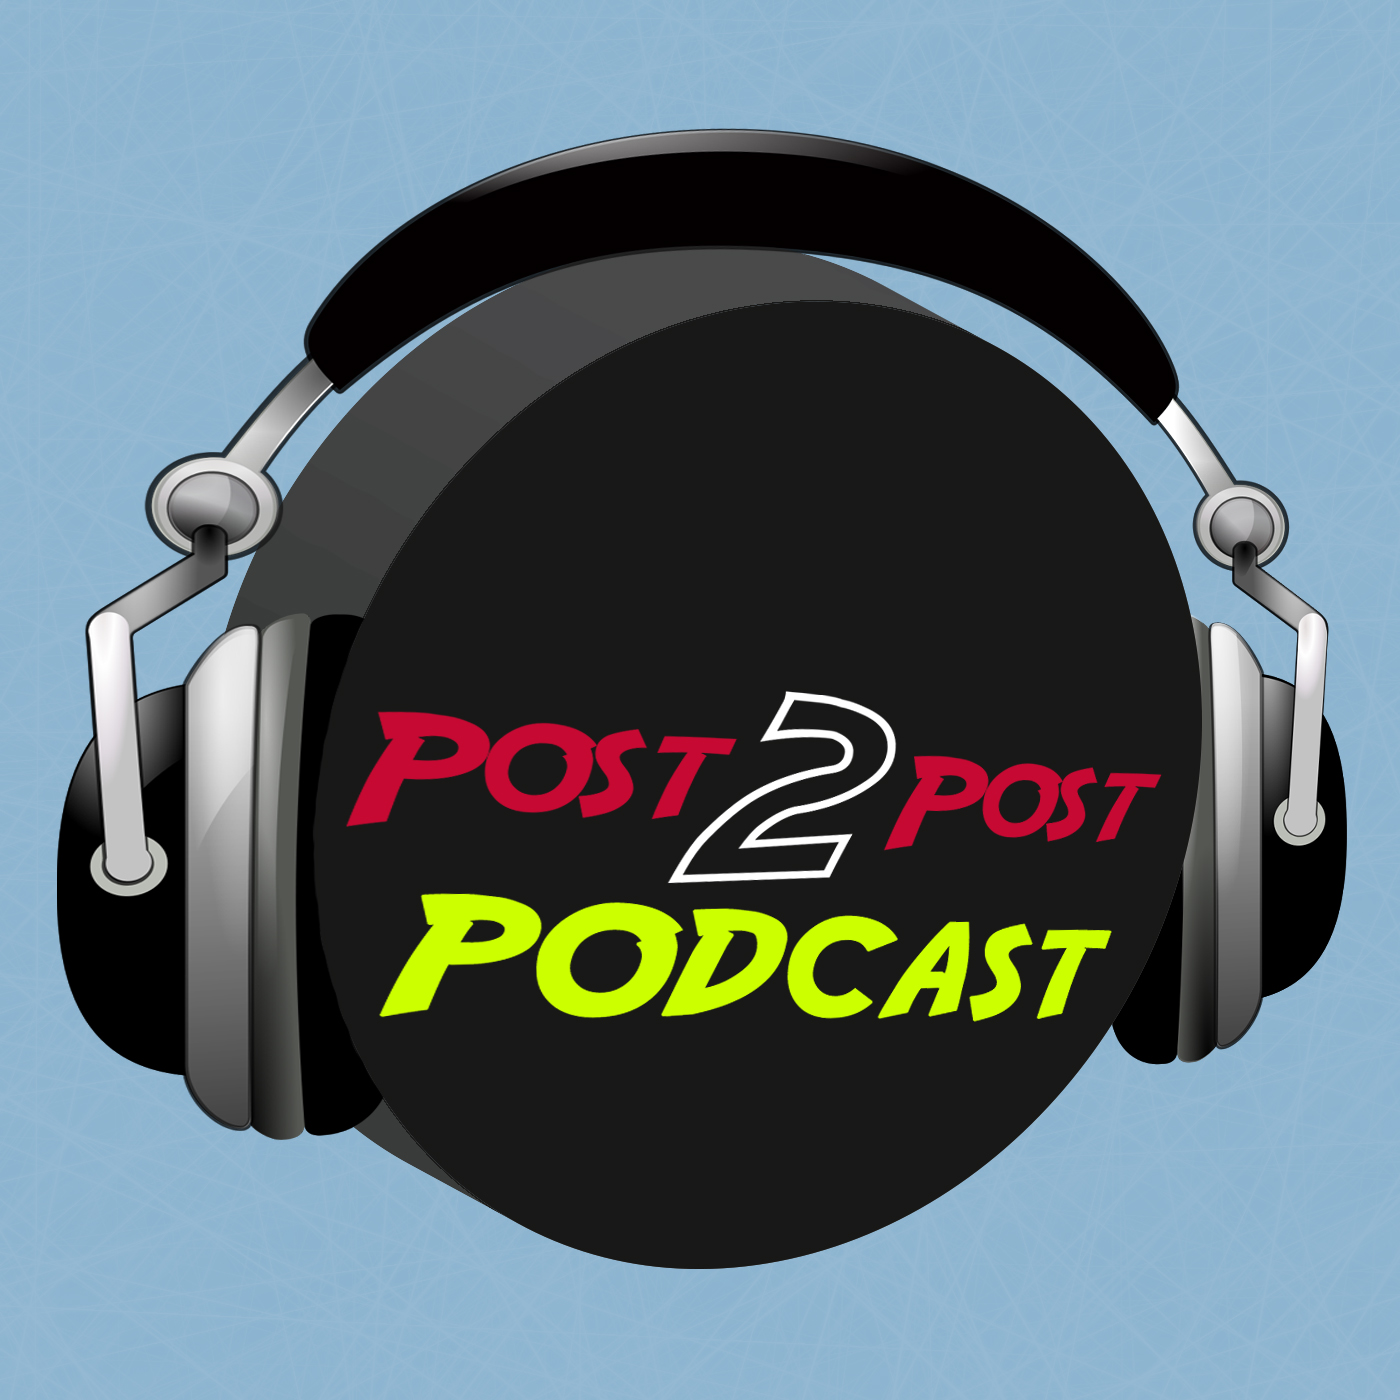 Post2Post Podcast: Episode 18 - “Goal Celebrations Video, Top & Bottom 10 Teams, Problems In Montreal”